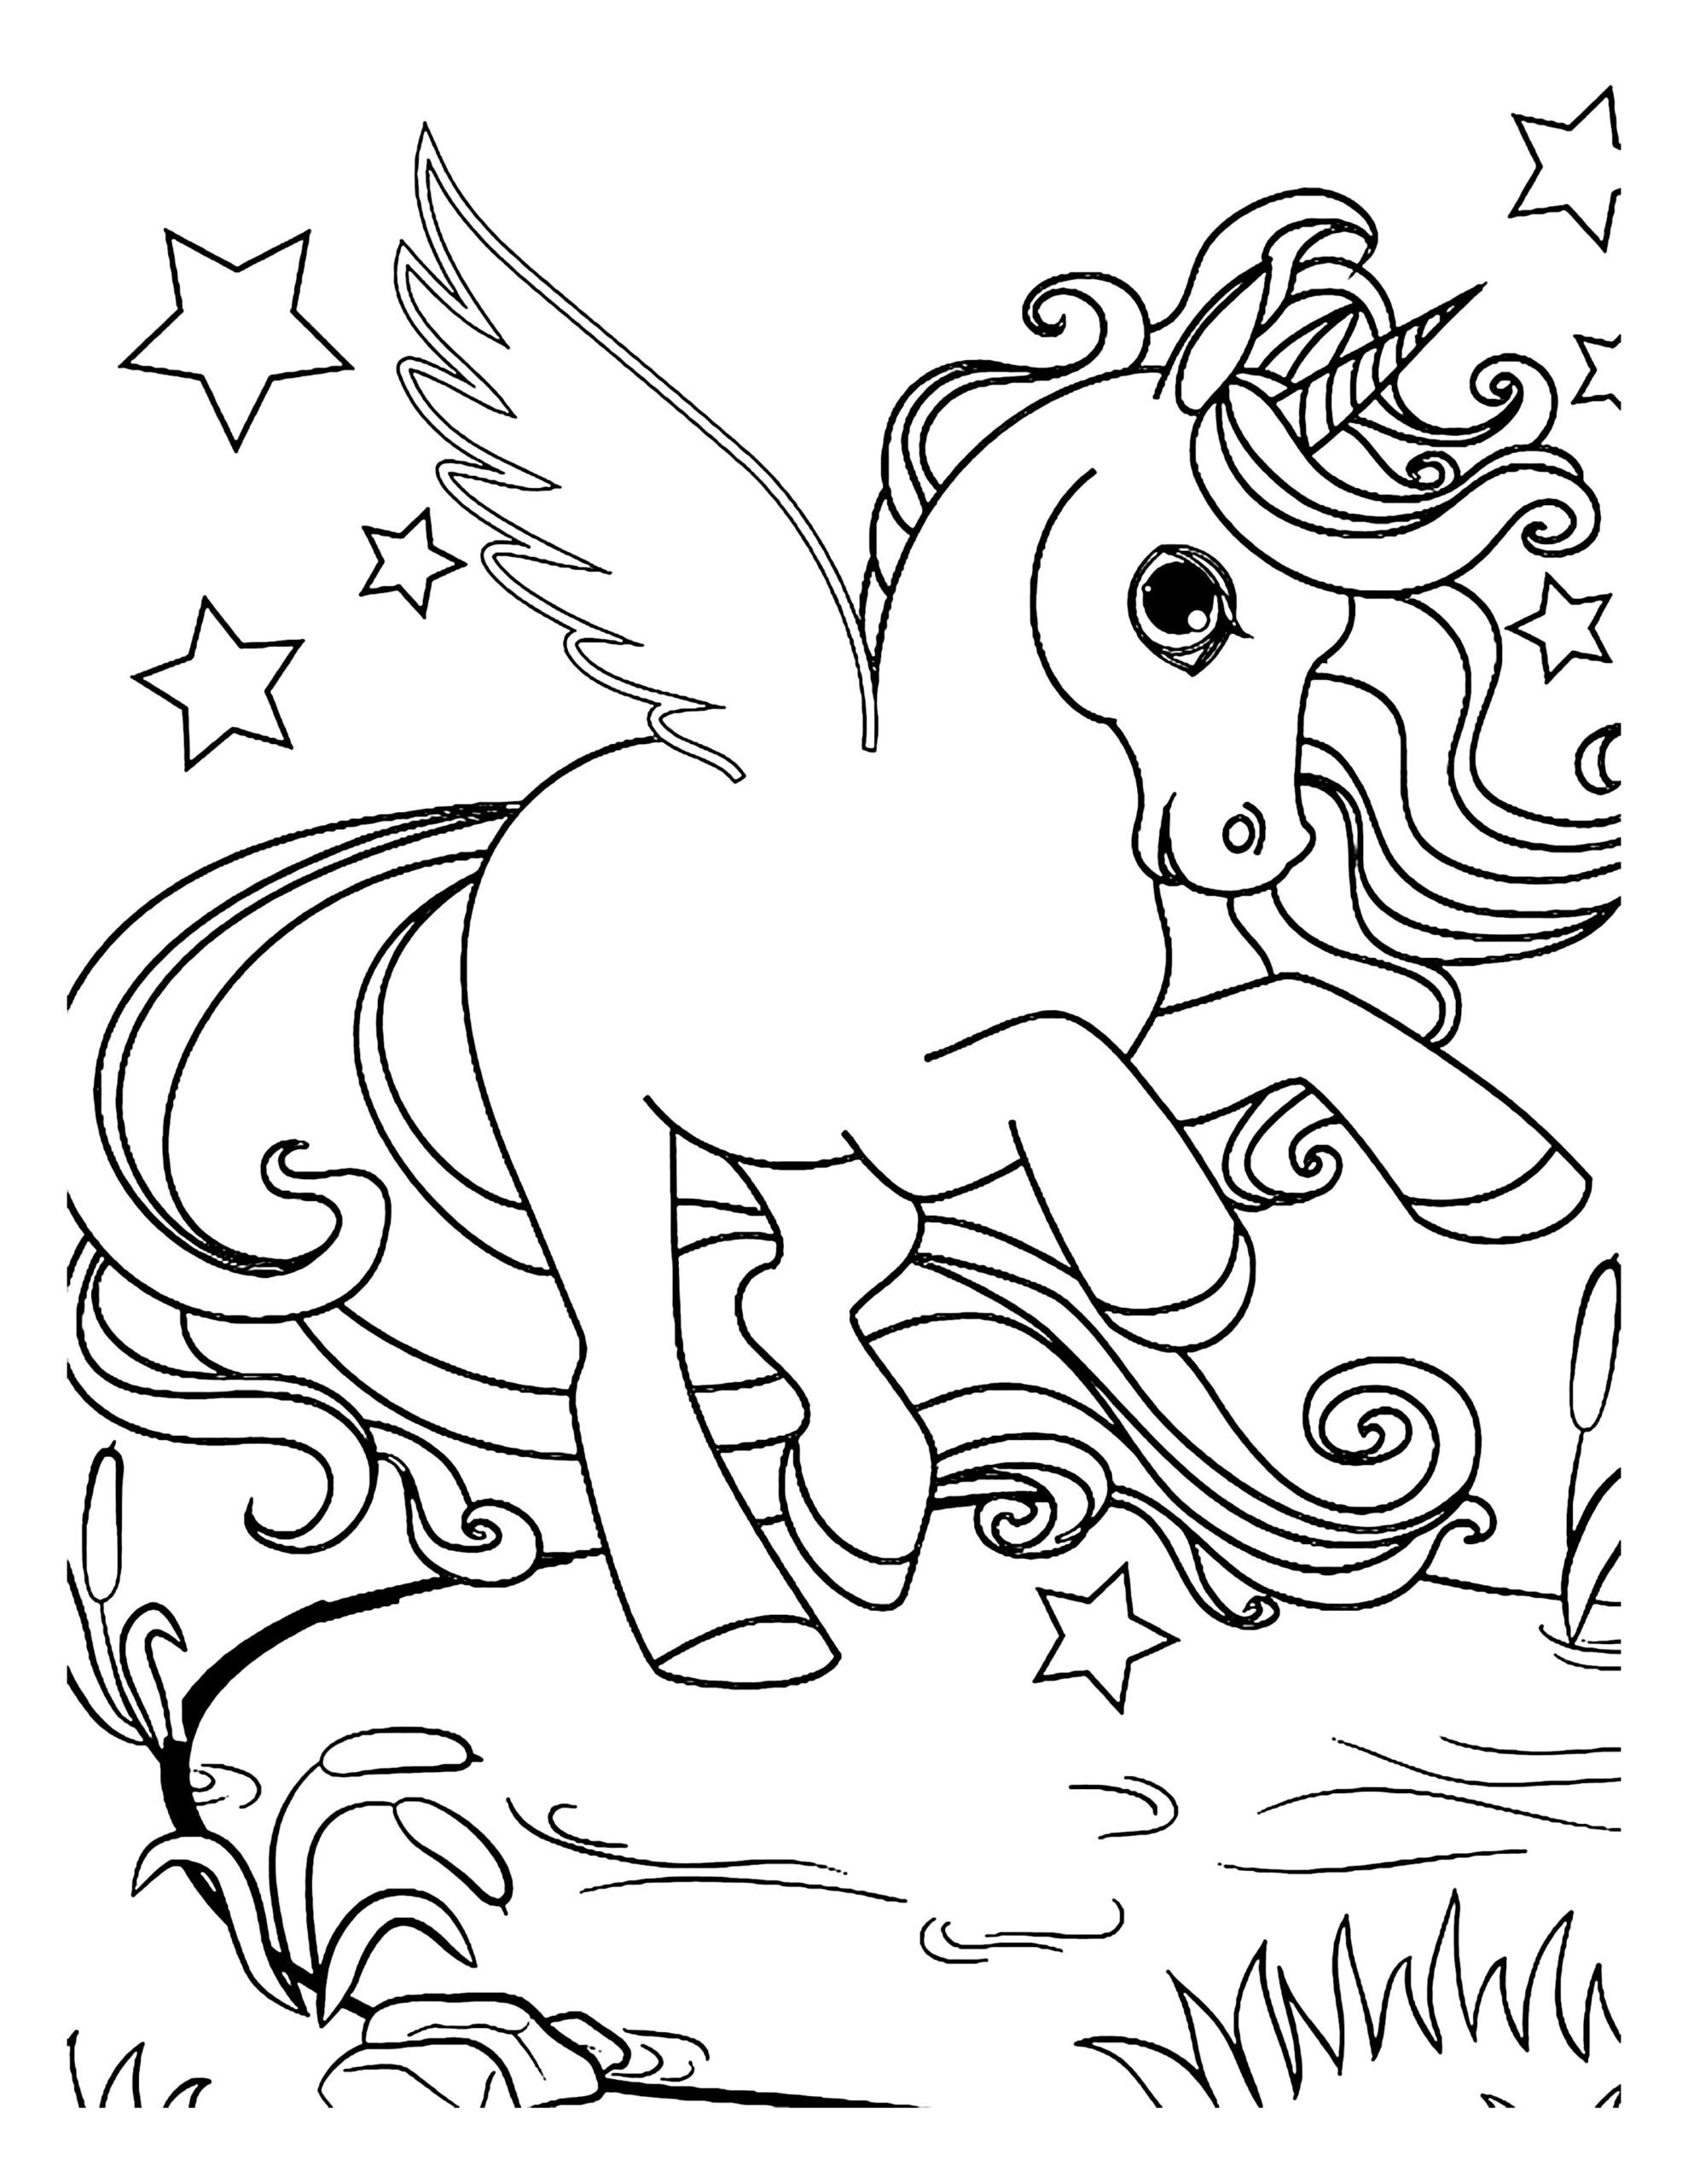 Unicorn 4 Coloring Pages